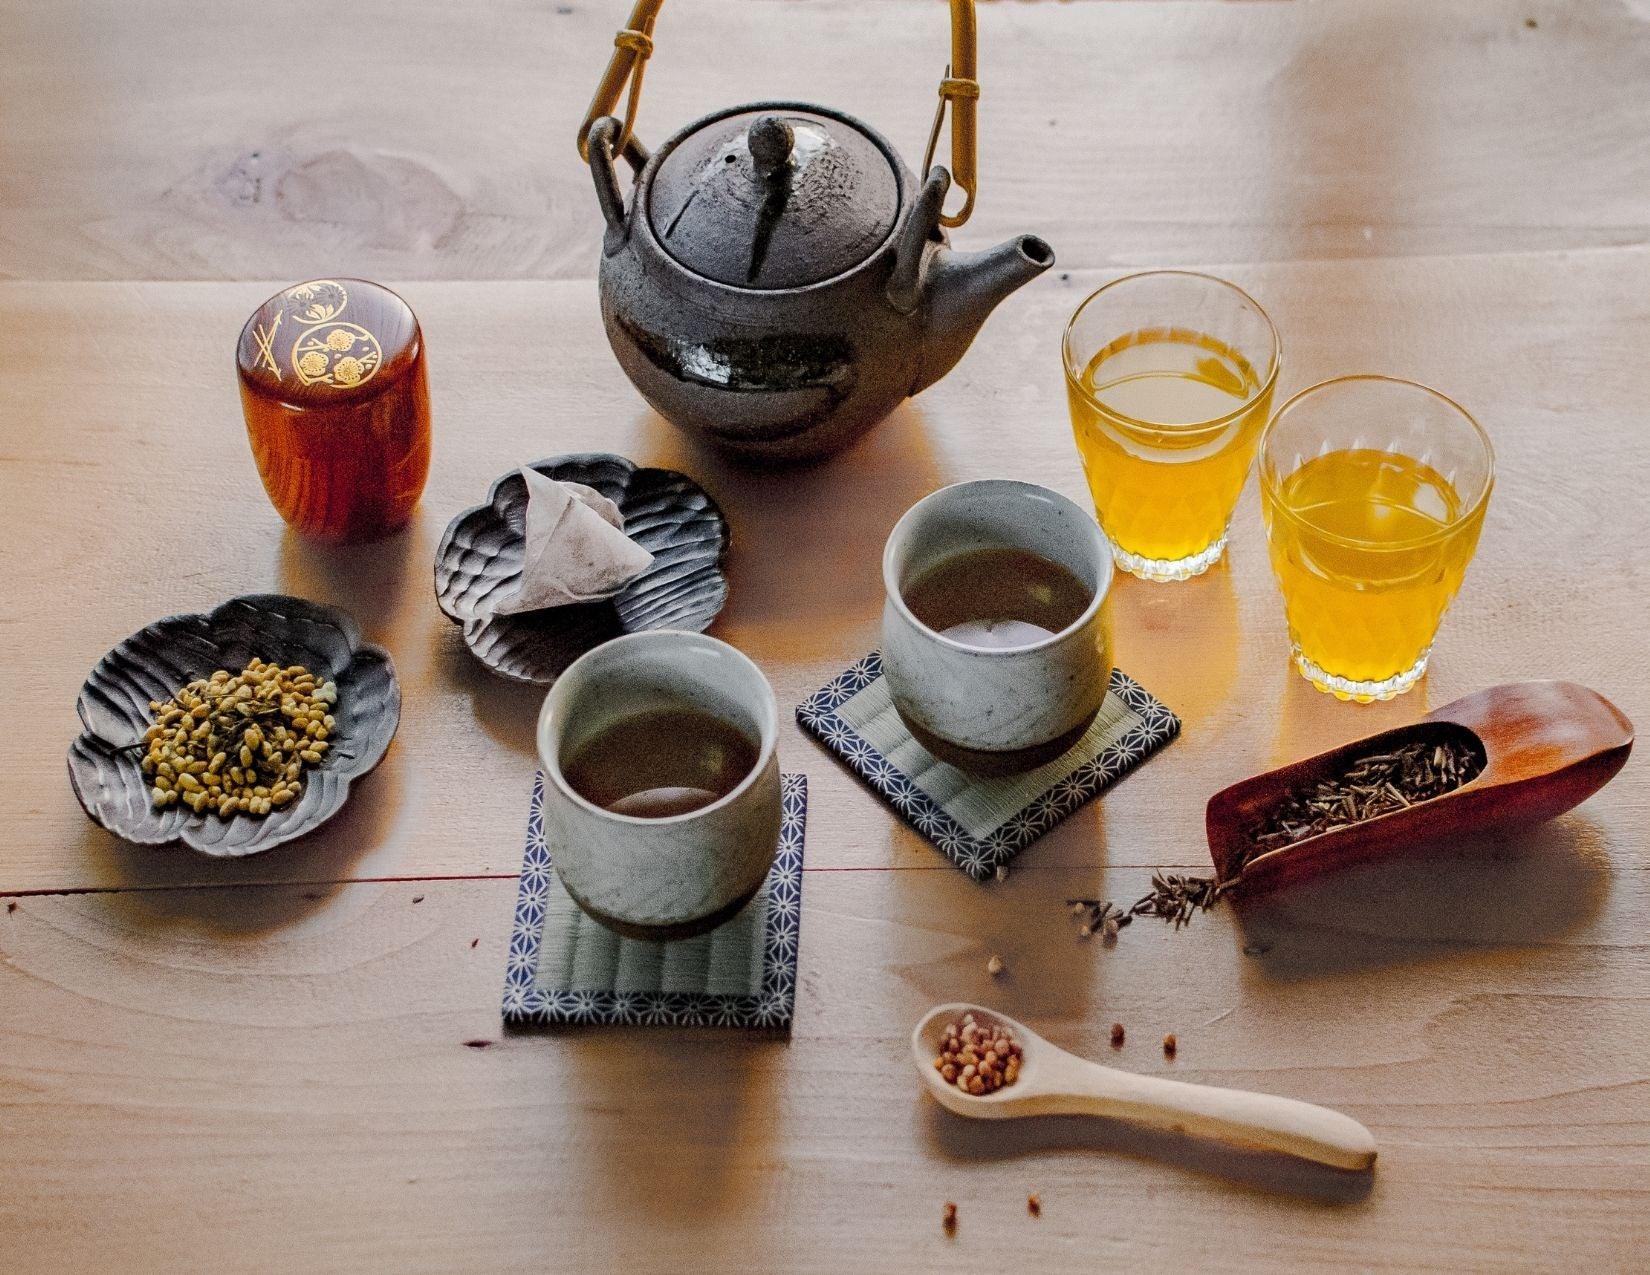 JAPANESE GREEN AND SPECIALTY TEAS: “Ryu” Care Package